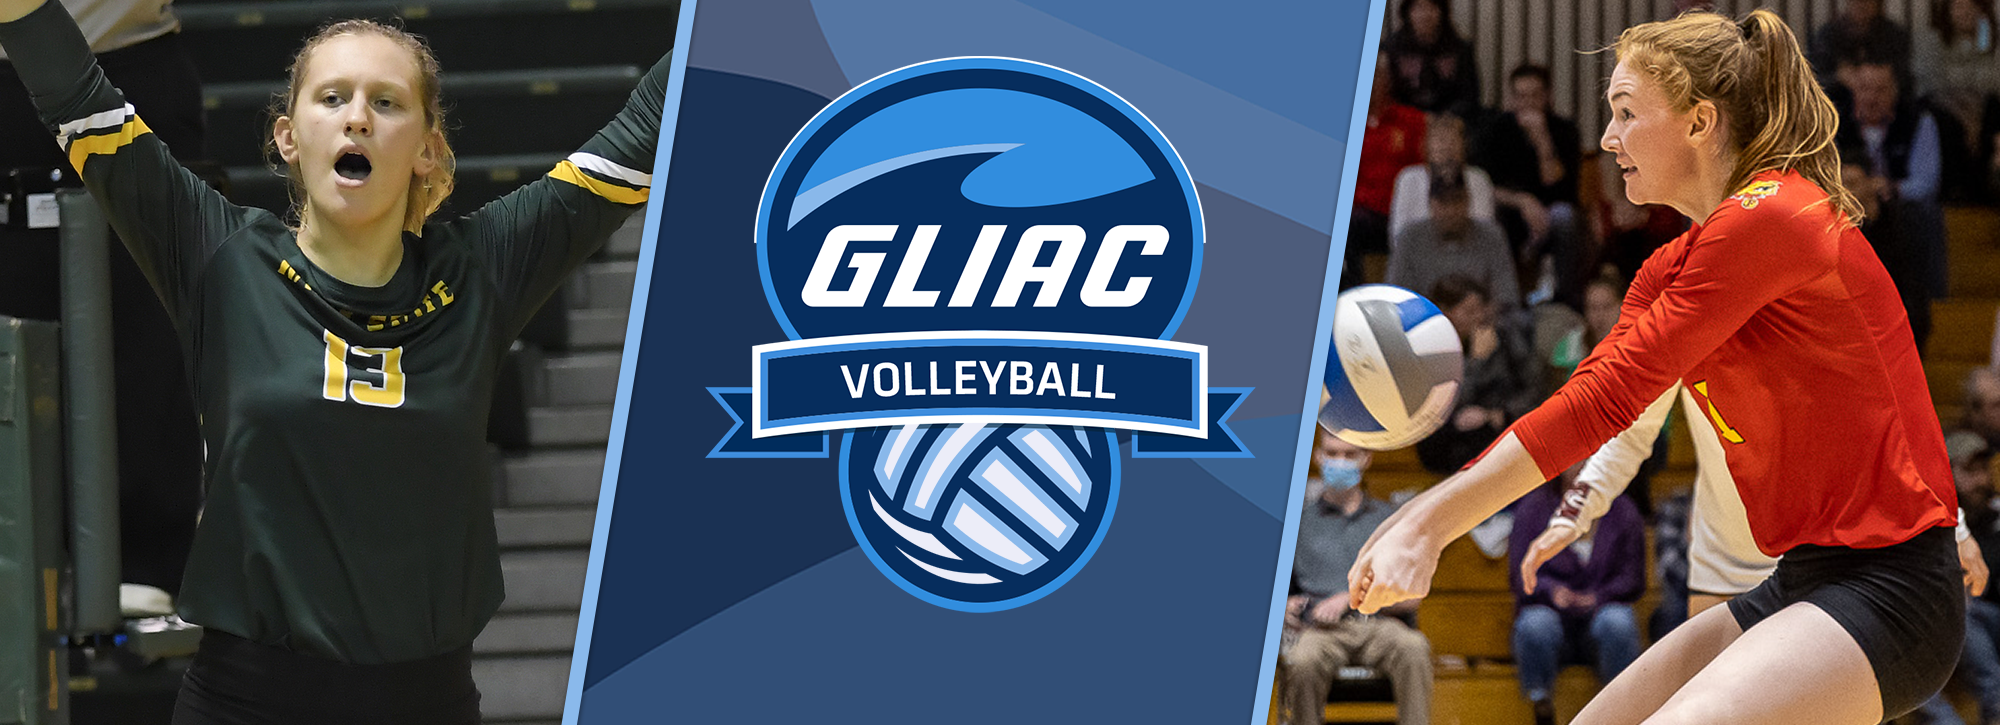 WSU's Withun and FSU's O'Connell named GLIAC volleyball players of the week